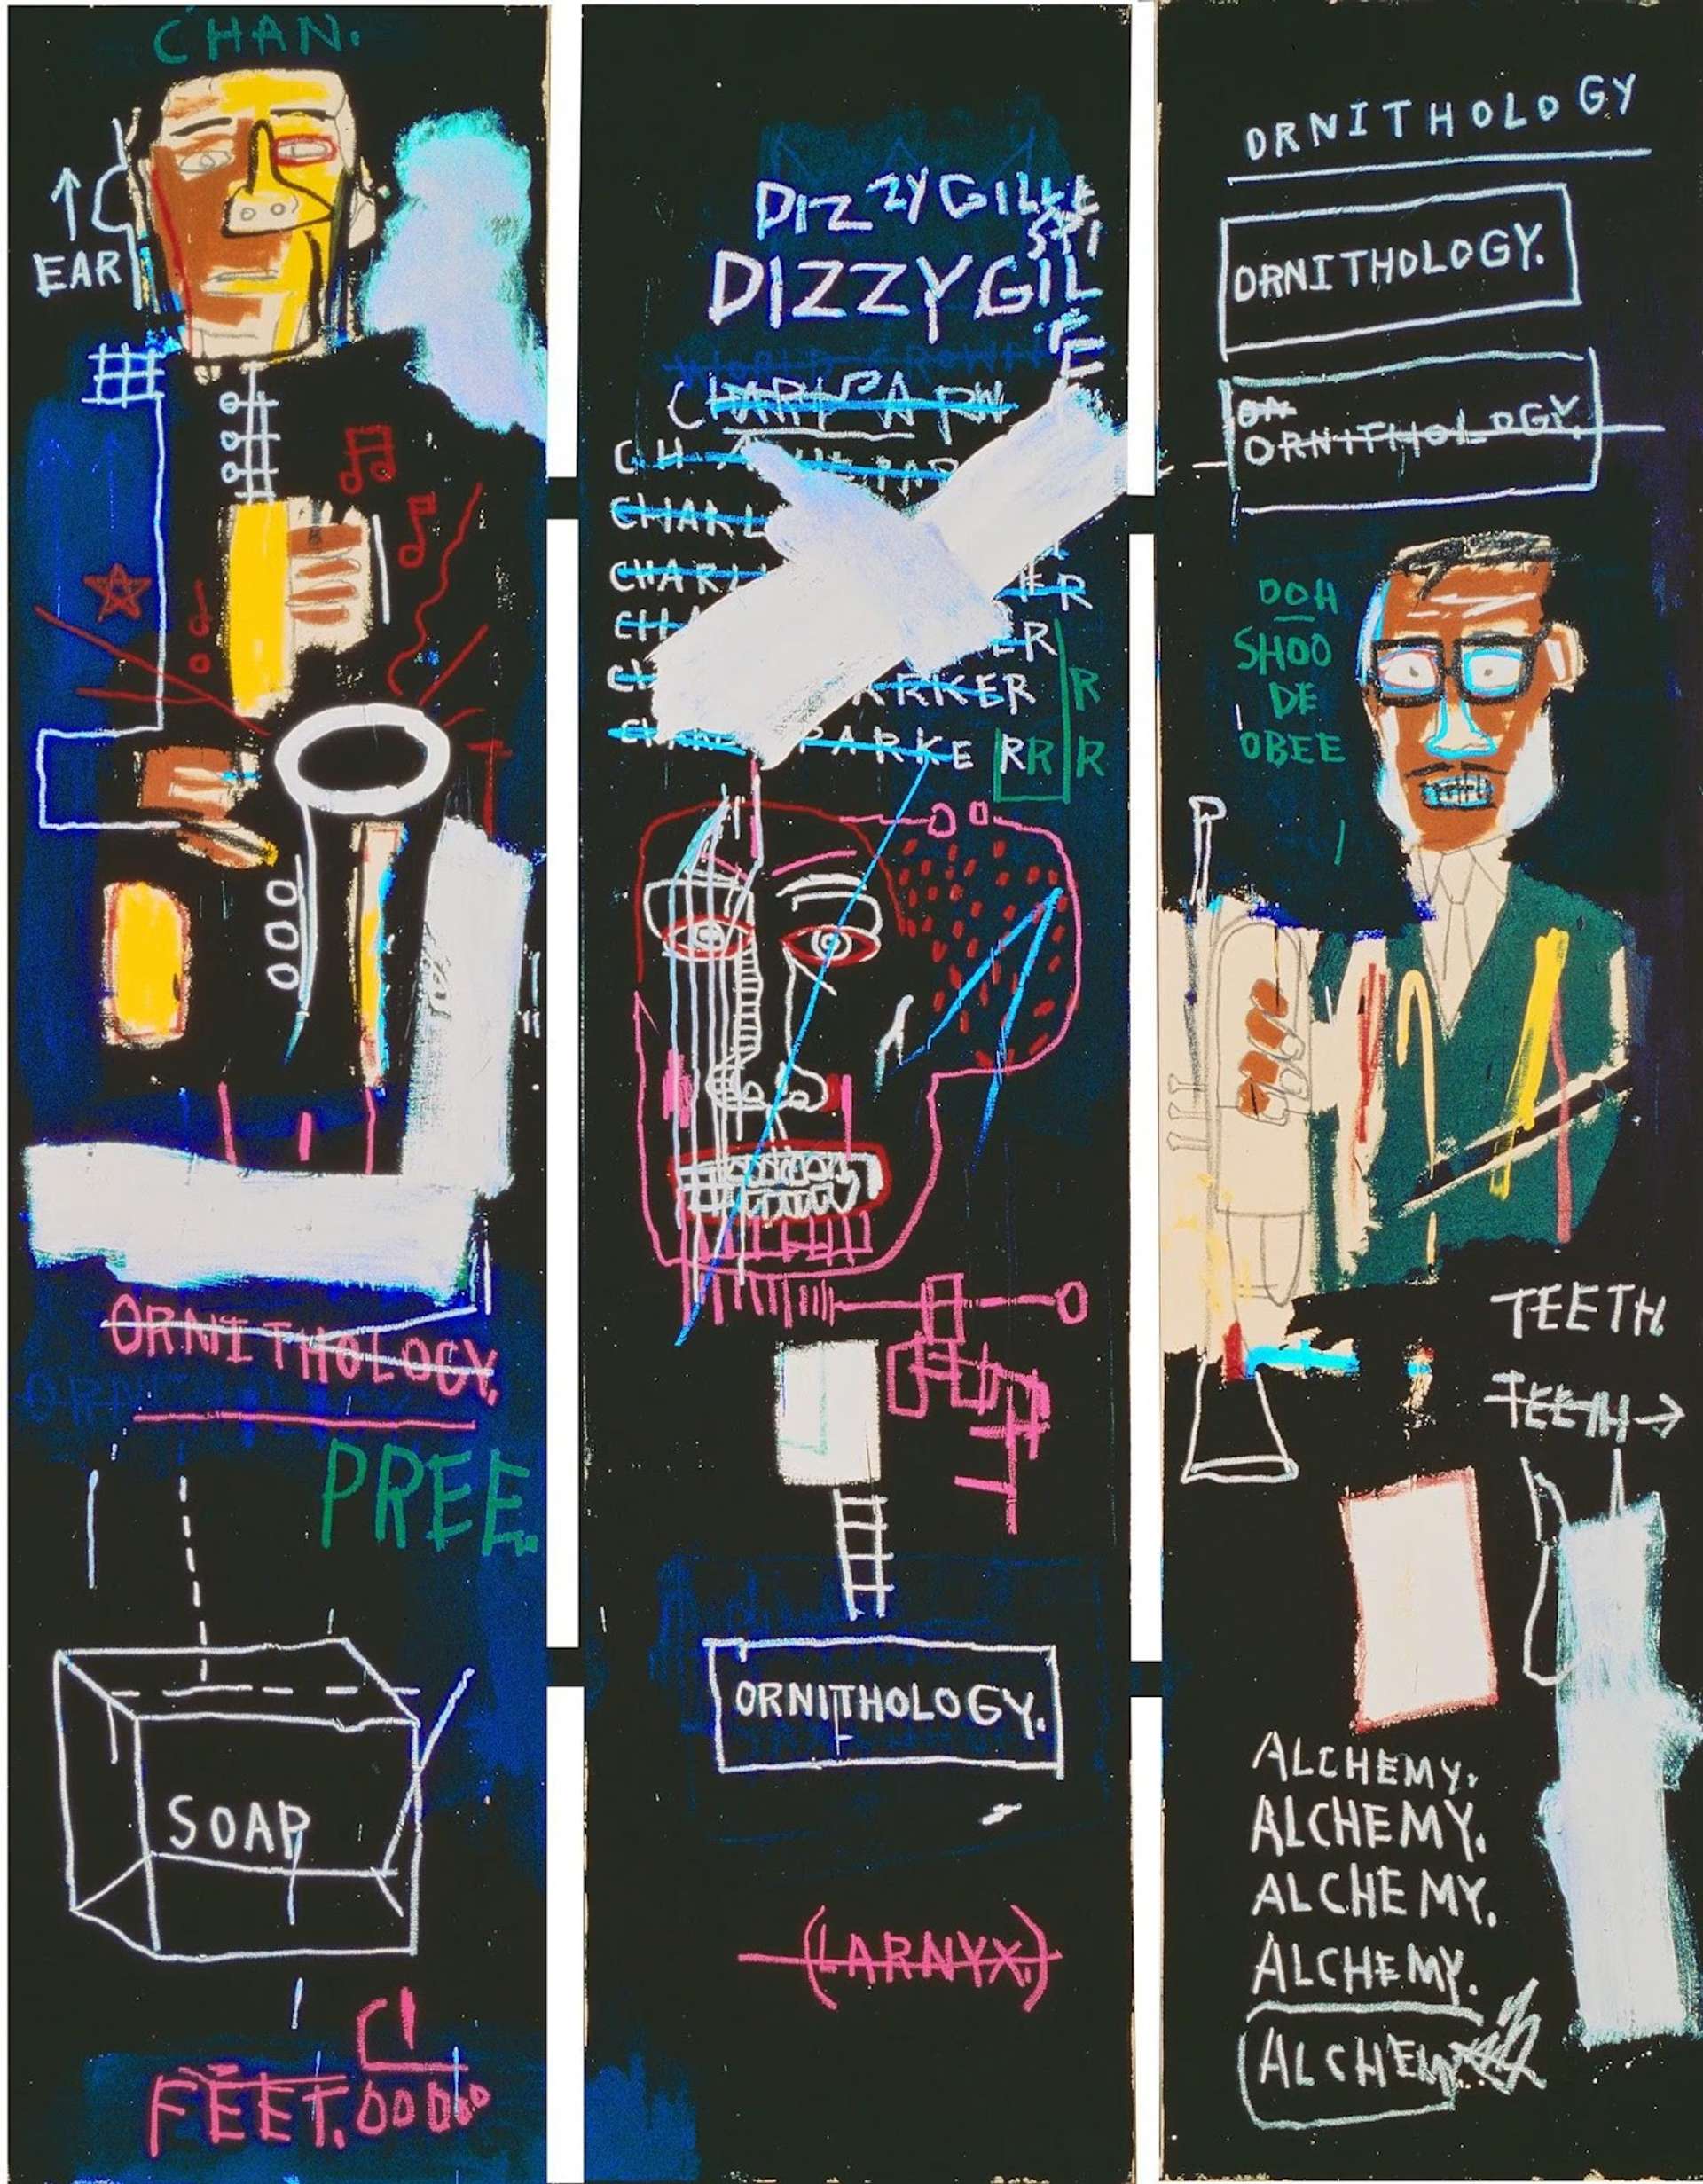 An image of the artwork Horn Players by Basquiat. It shows stylised figures, surrounded by Basquiat’s signature scribbles including medical terms. It also features many onomatopoeias, such as “Doh Shoo De Obee”.